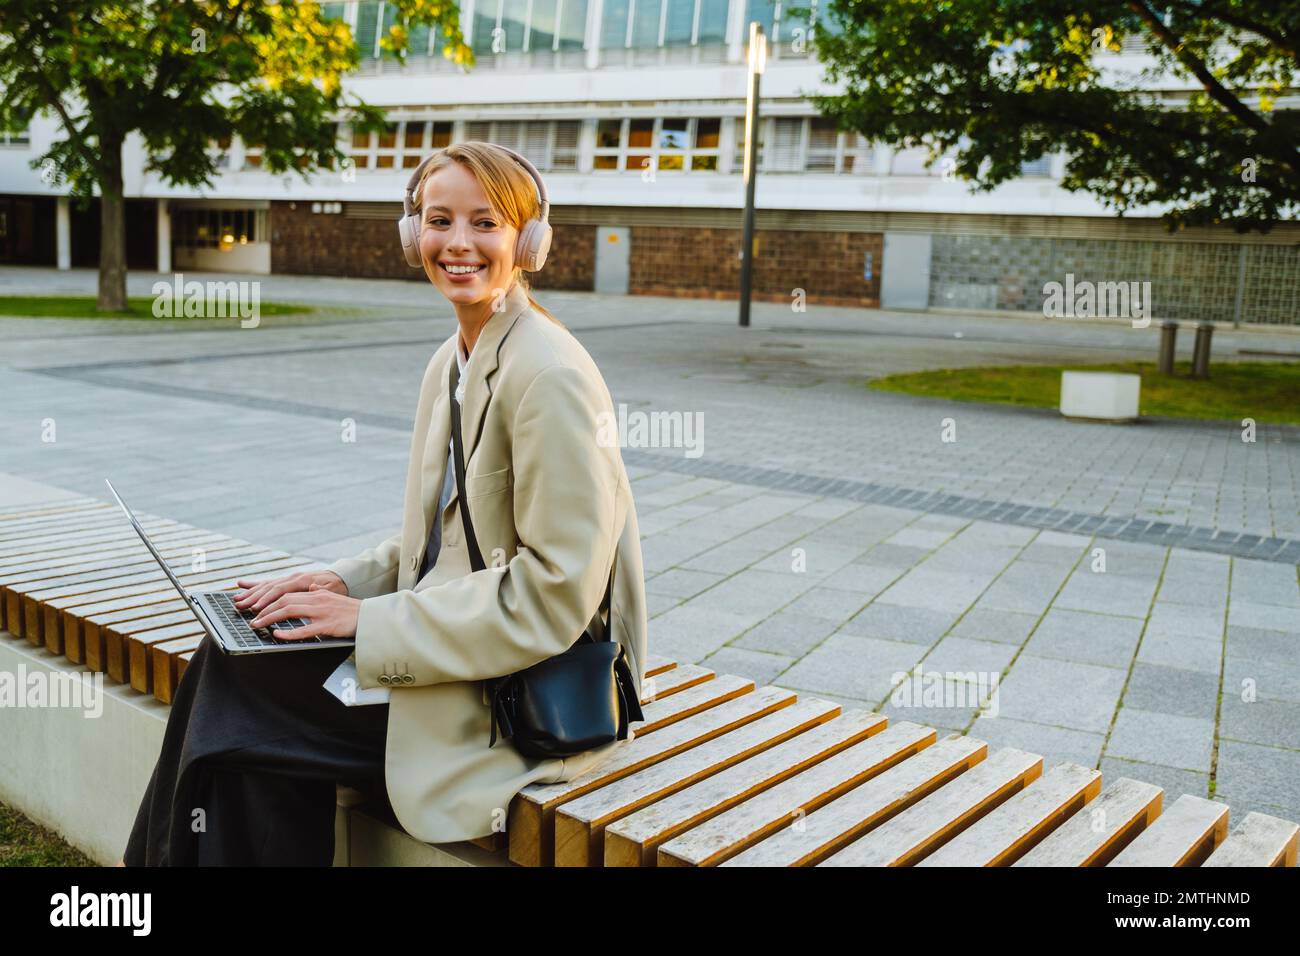 Young white woman using laptop and headphones while sitting on bench outdoors Stock Photo